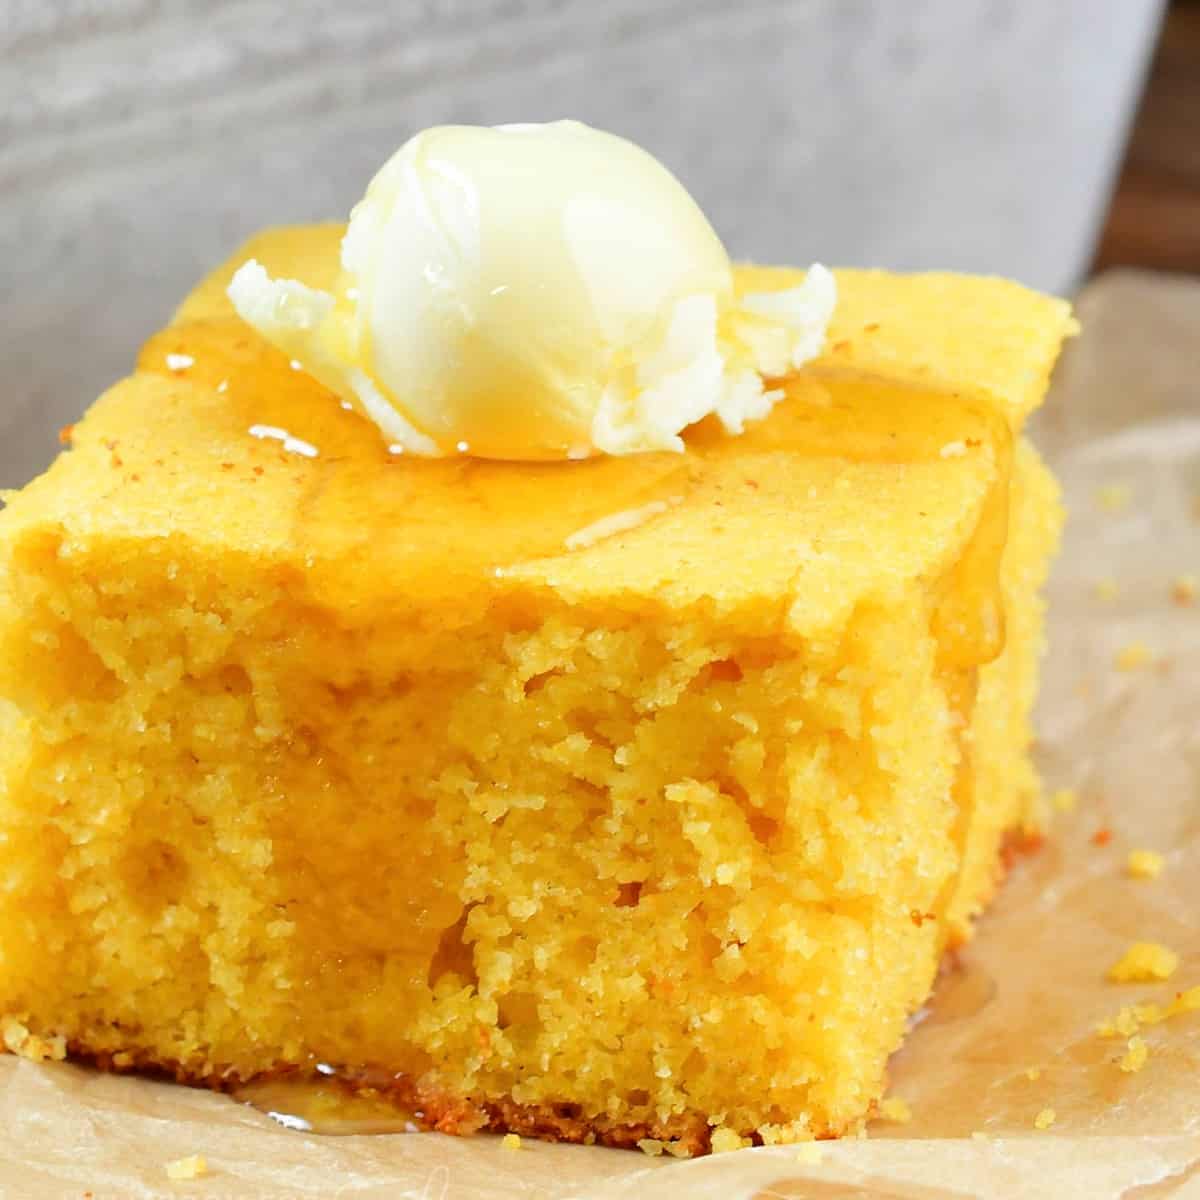 https://www.willcookforsmiles.com/wp-content/uploads/2022/11/Buttermilk-Cornbread-with-butter-and-honey-square.jpg